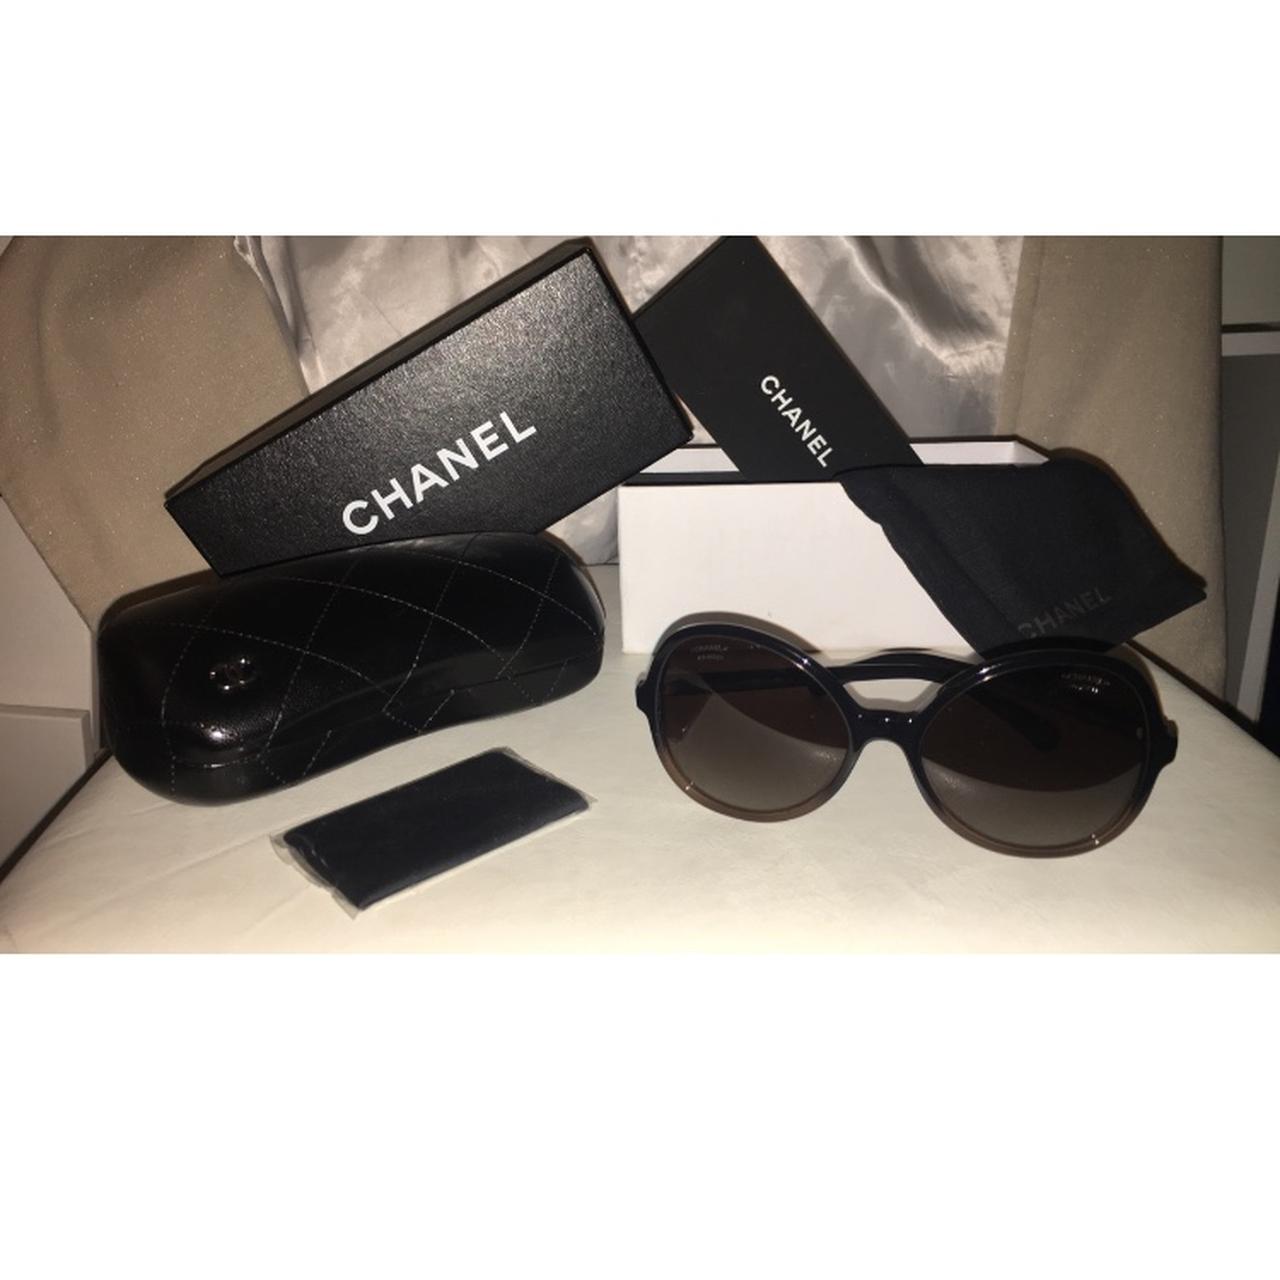 Chanel Sunglasses, brand new, got as a gift. , Open